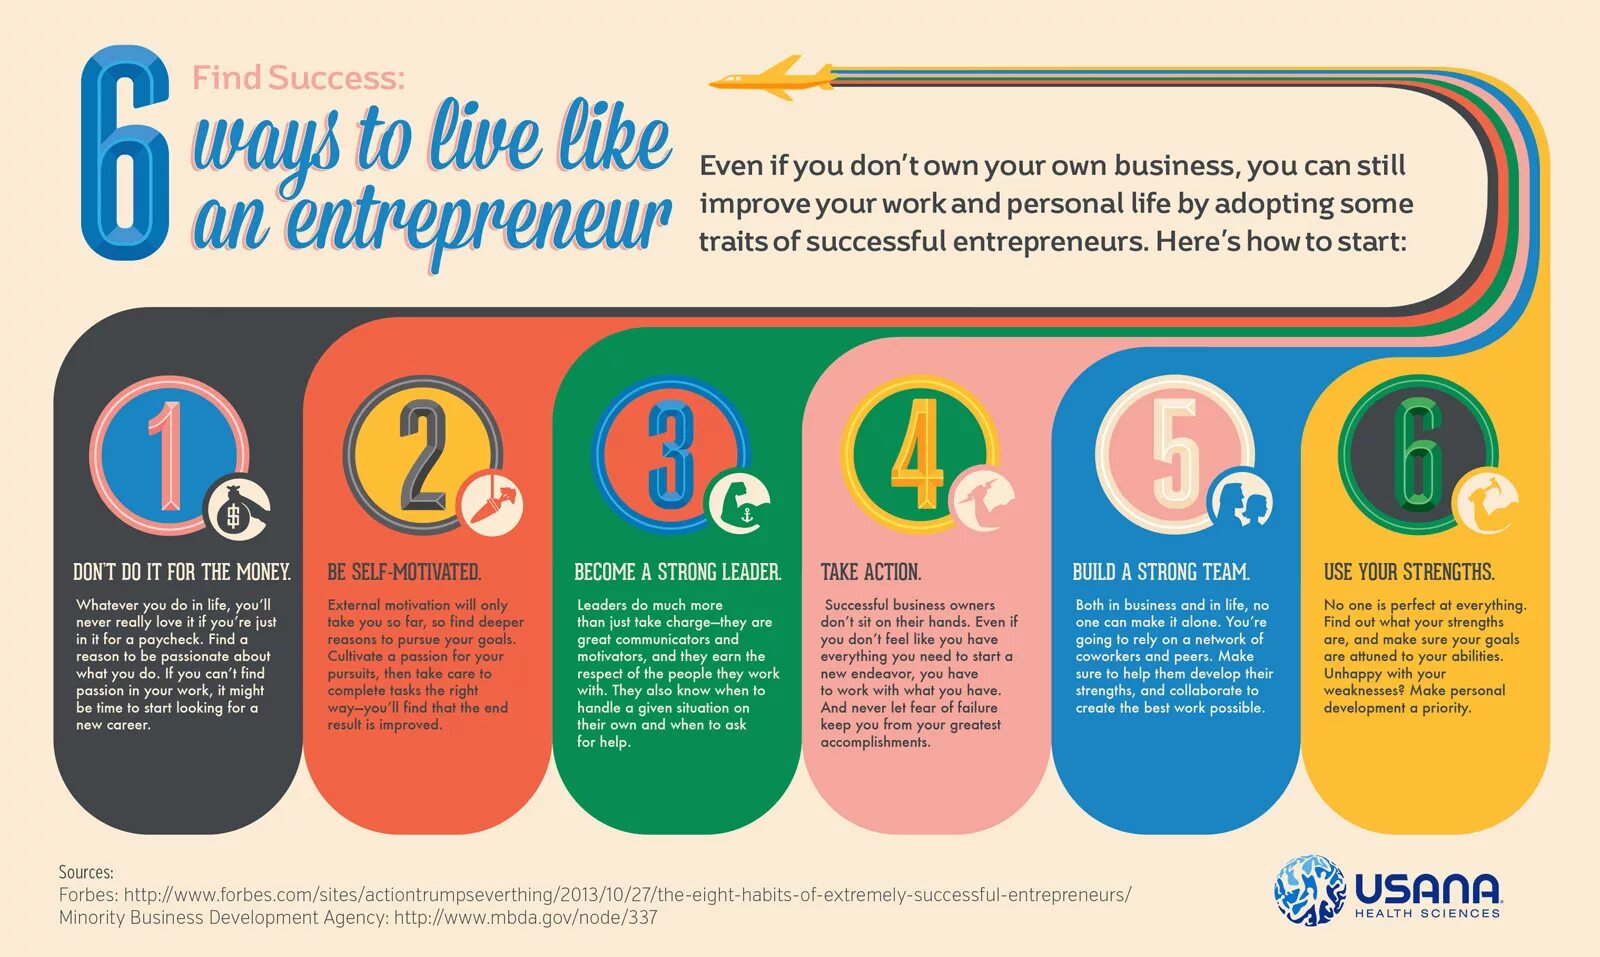 Most people like. On your own. Make your own Business. Ten ways to improve your career. How create your own Business.